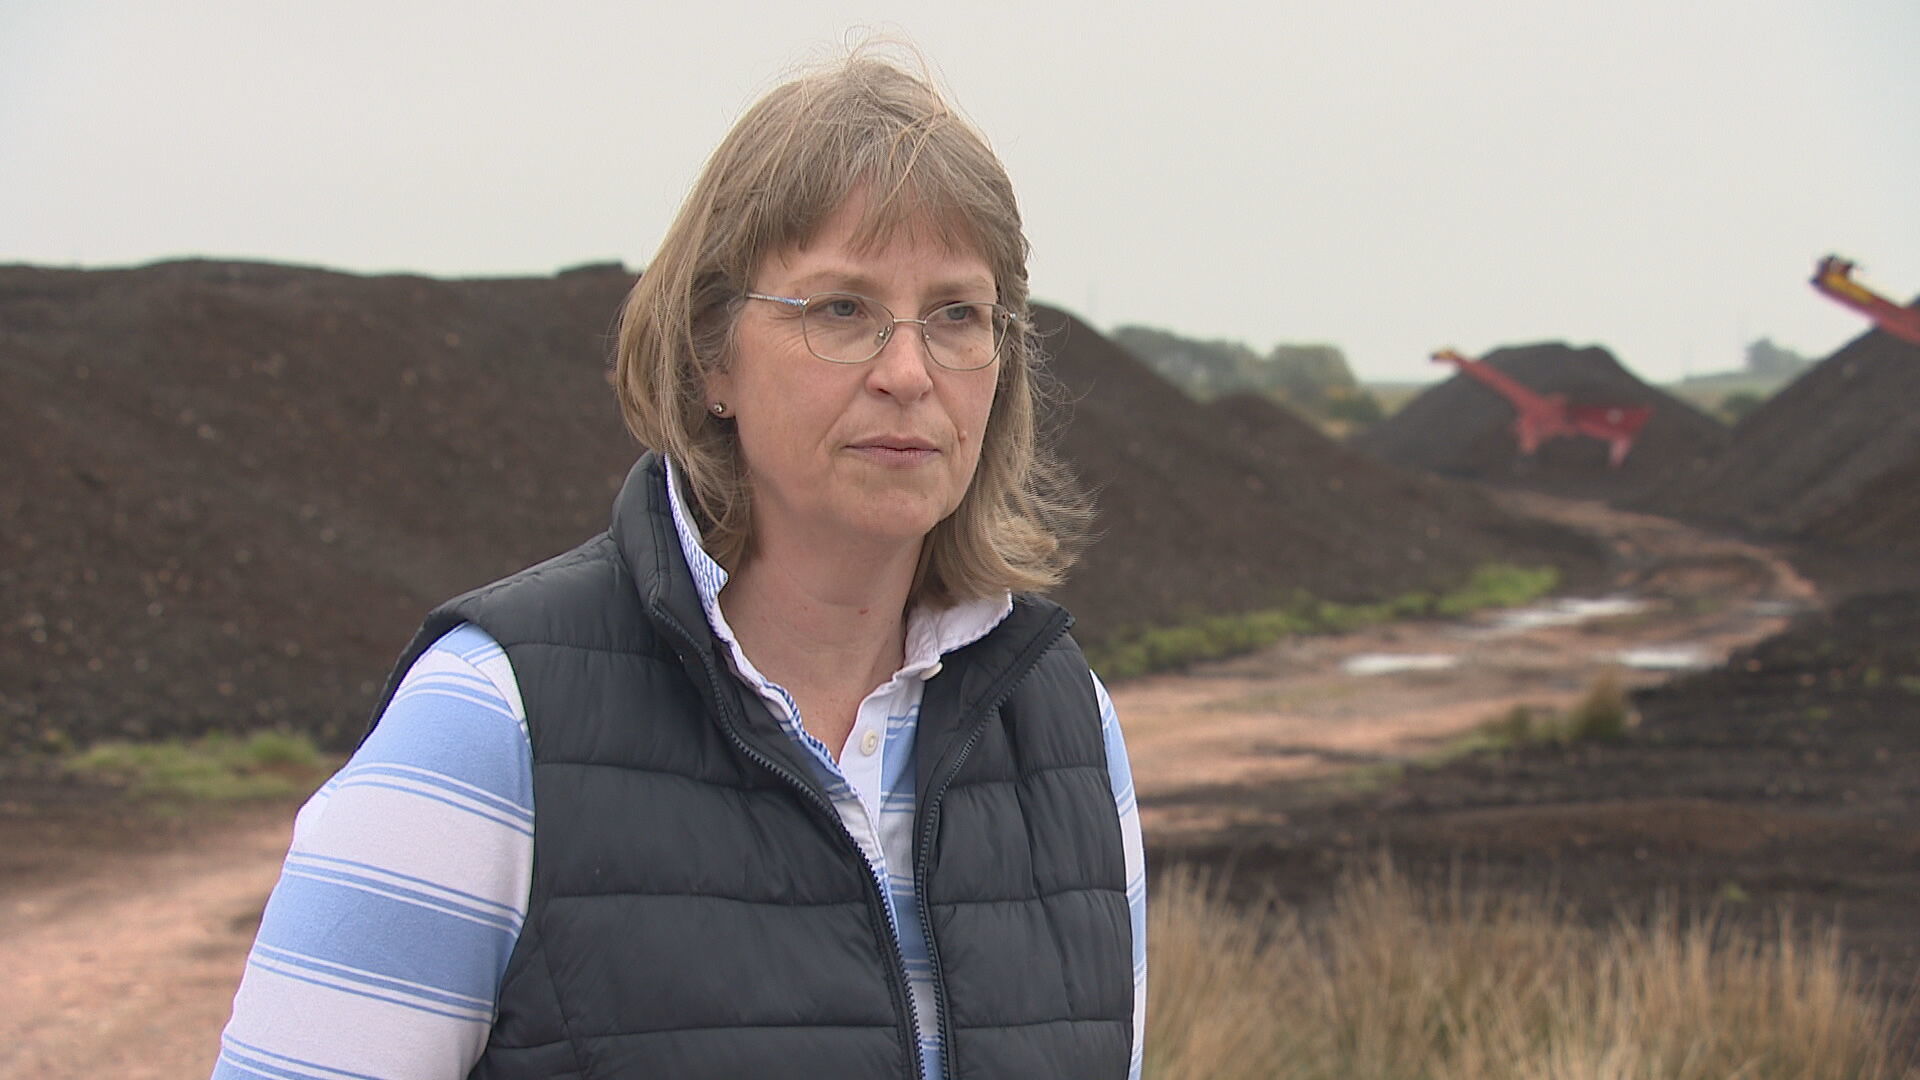 Local businesses that rely on peat say their future is under threat